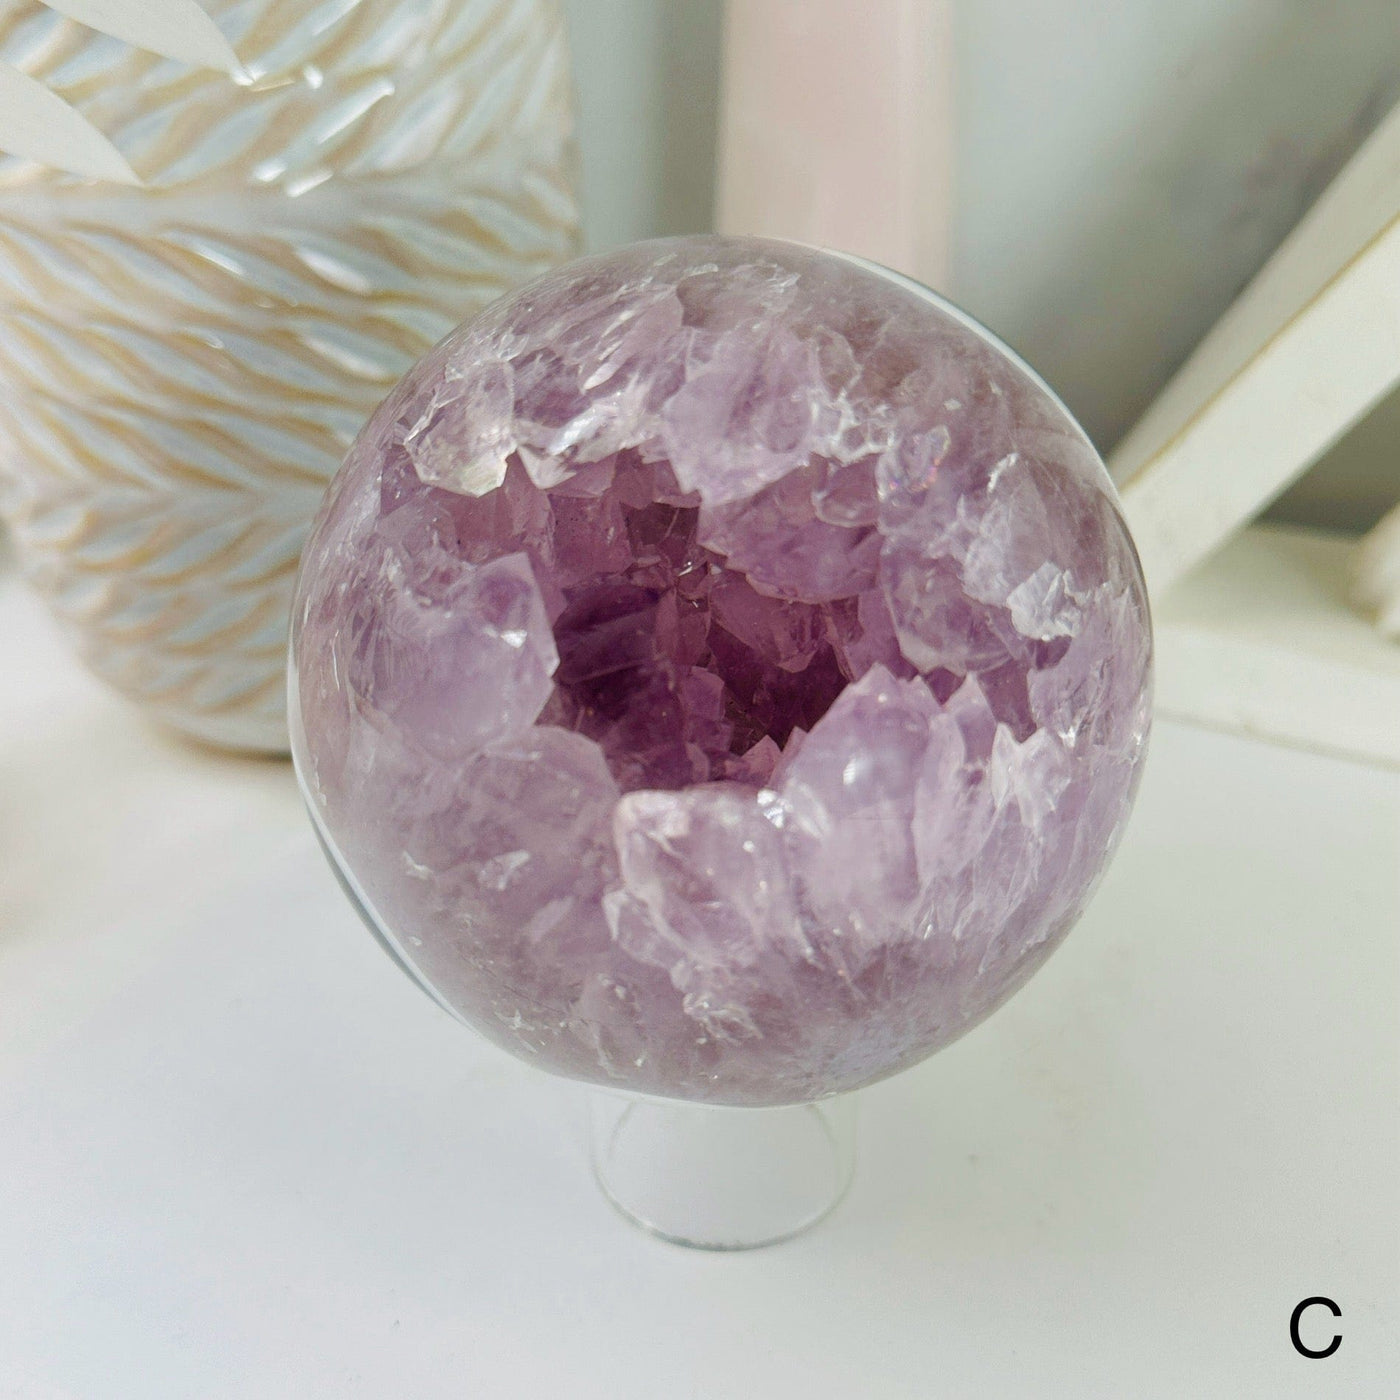 Amethyst Sphere - Crystal Ball - YOU CHOOSE variant C labeled